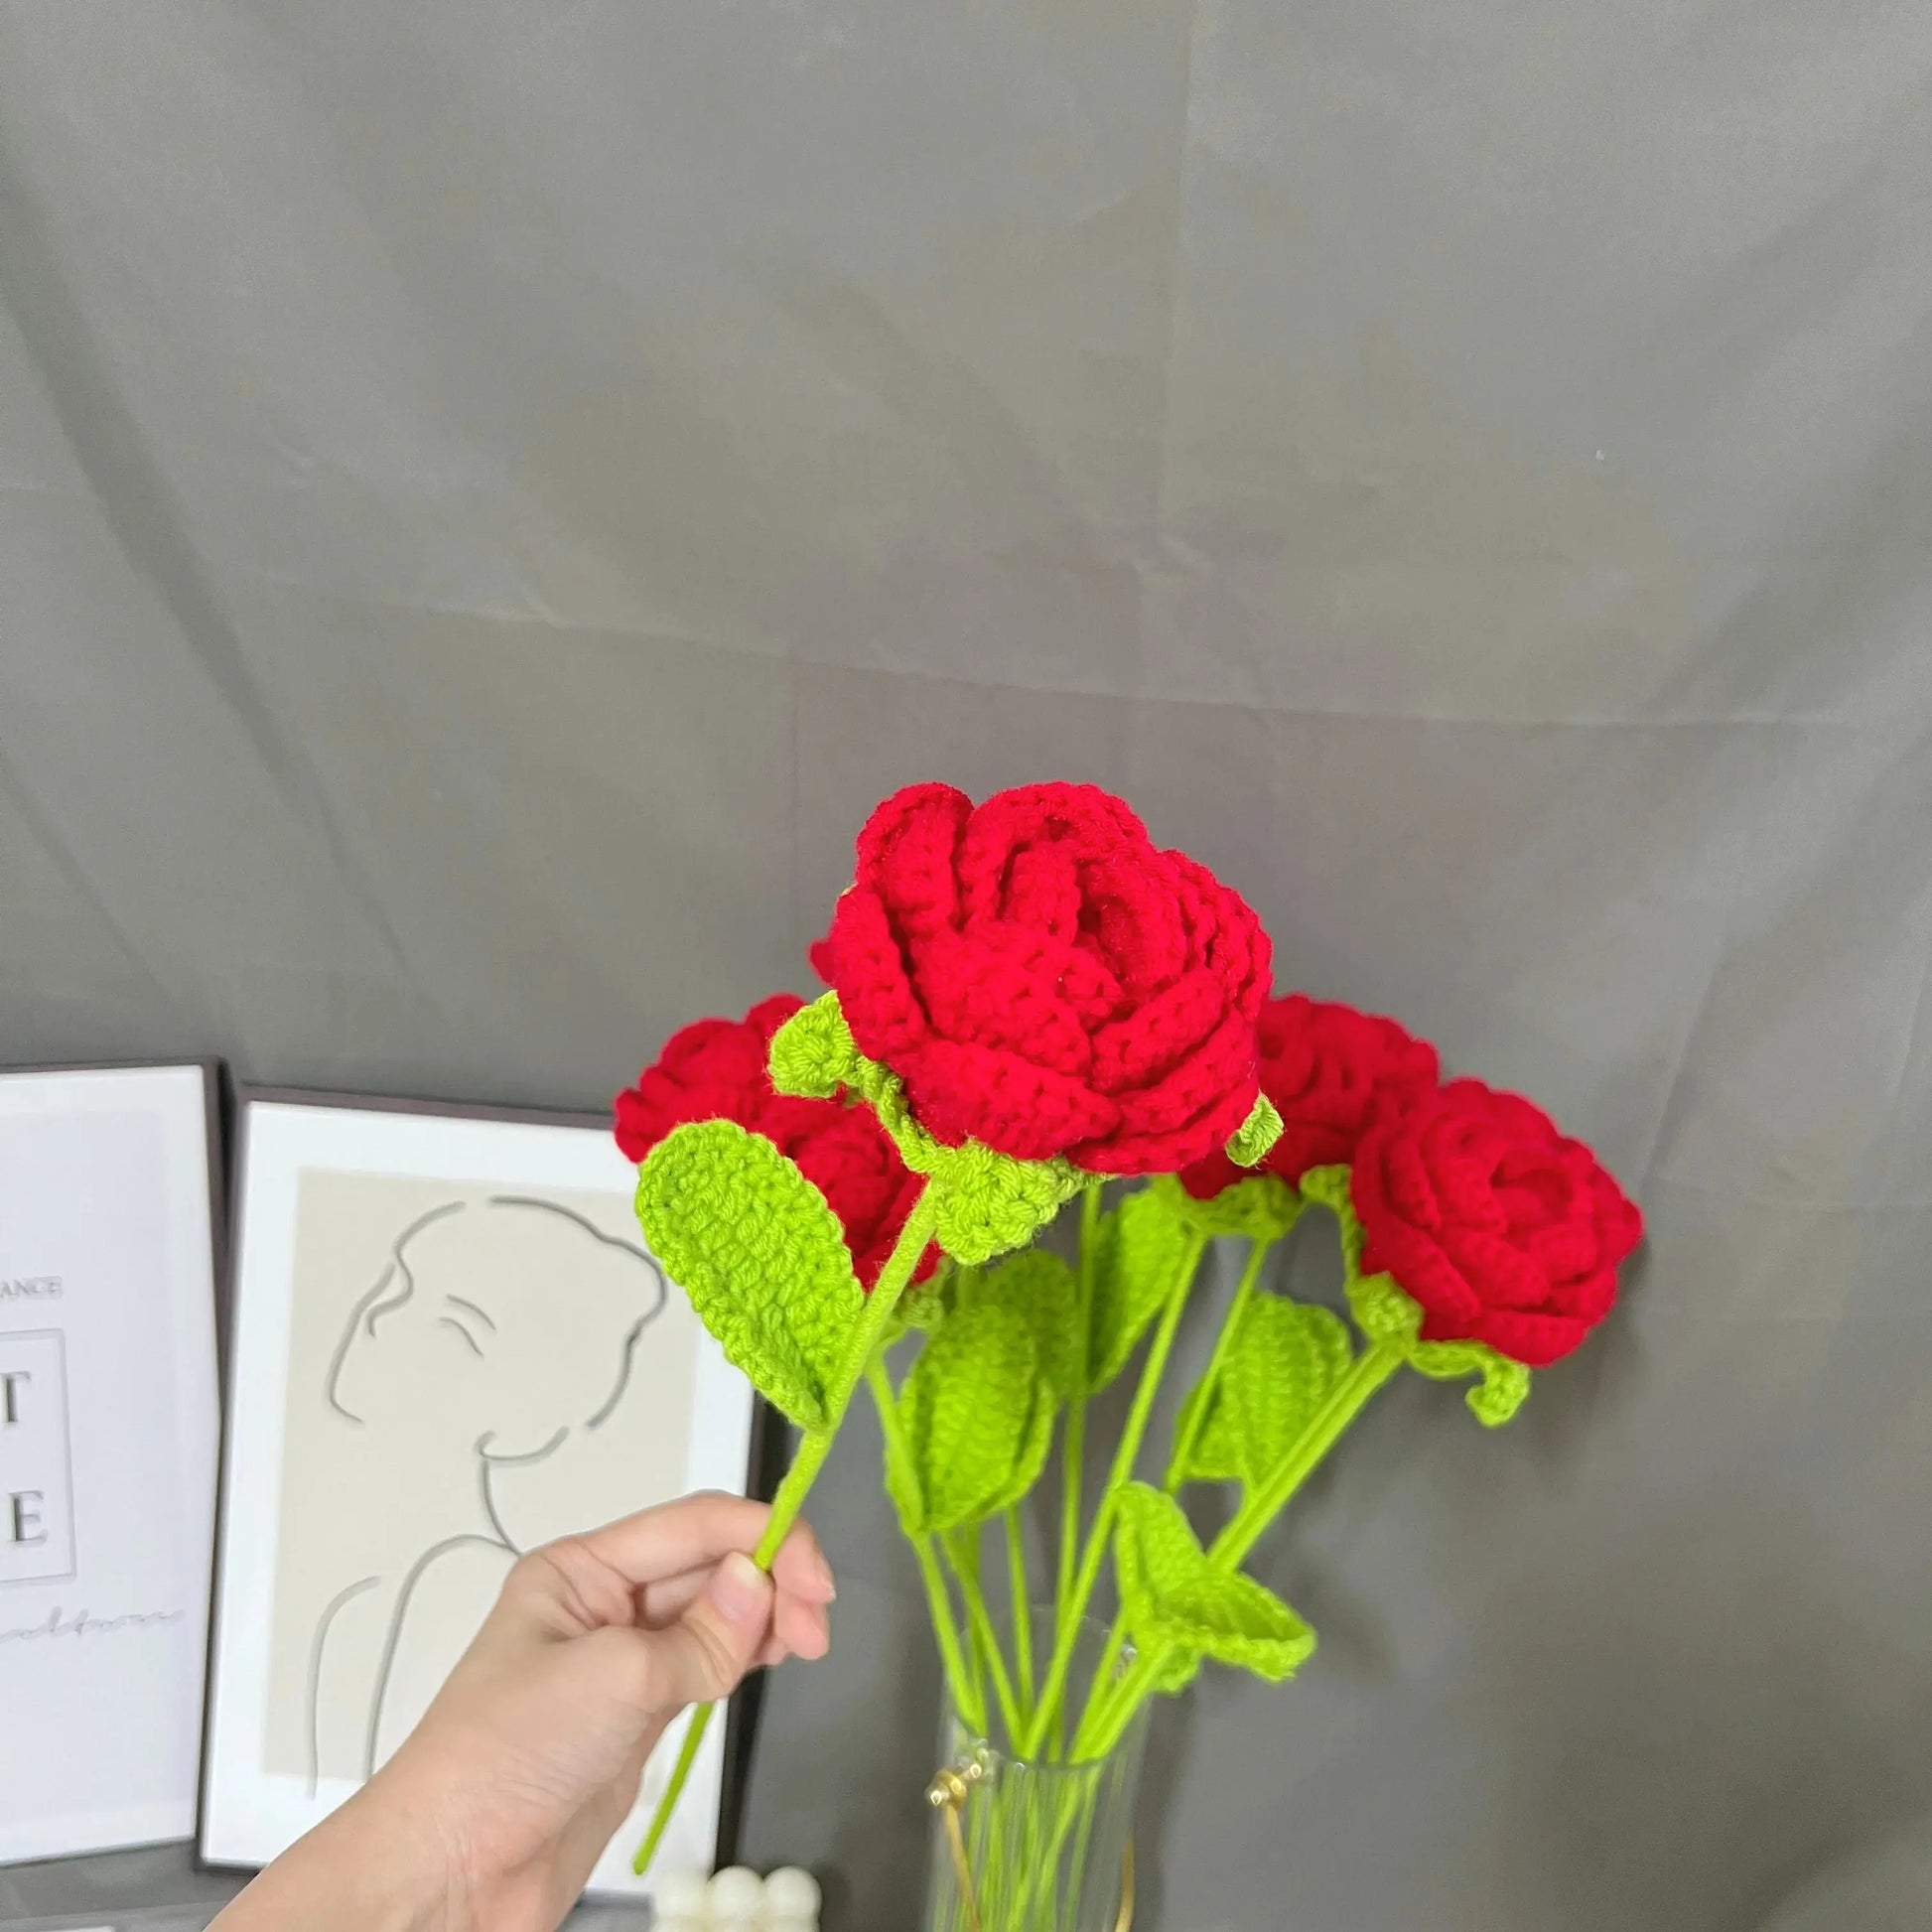 a hand holding a crocheted red rose in a vase